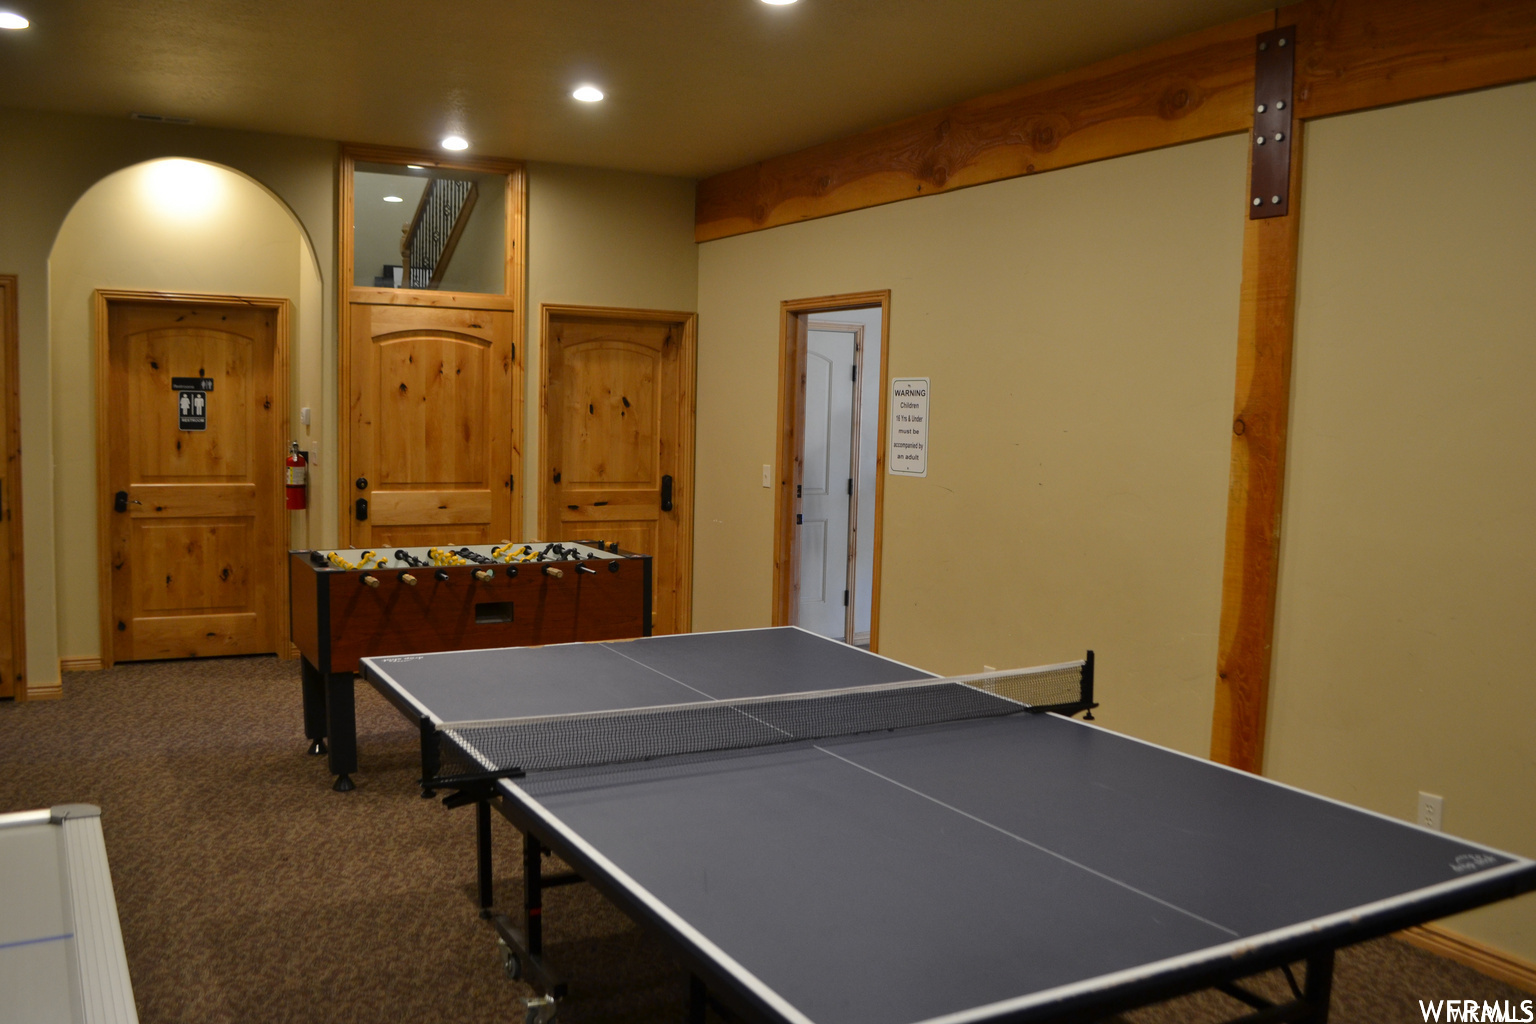 Community Other: Community Game Room